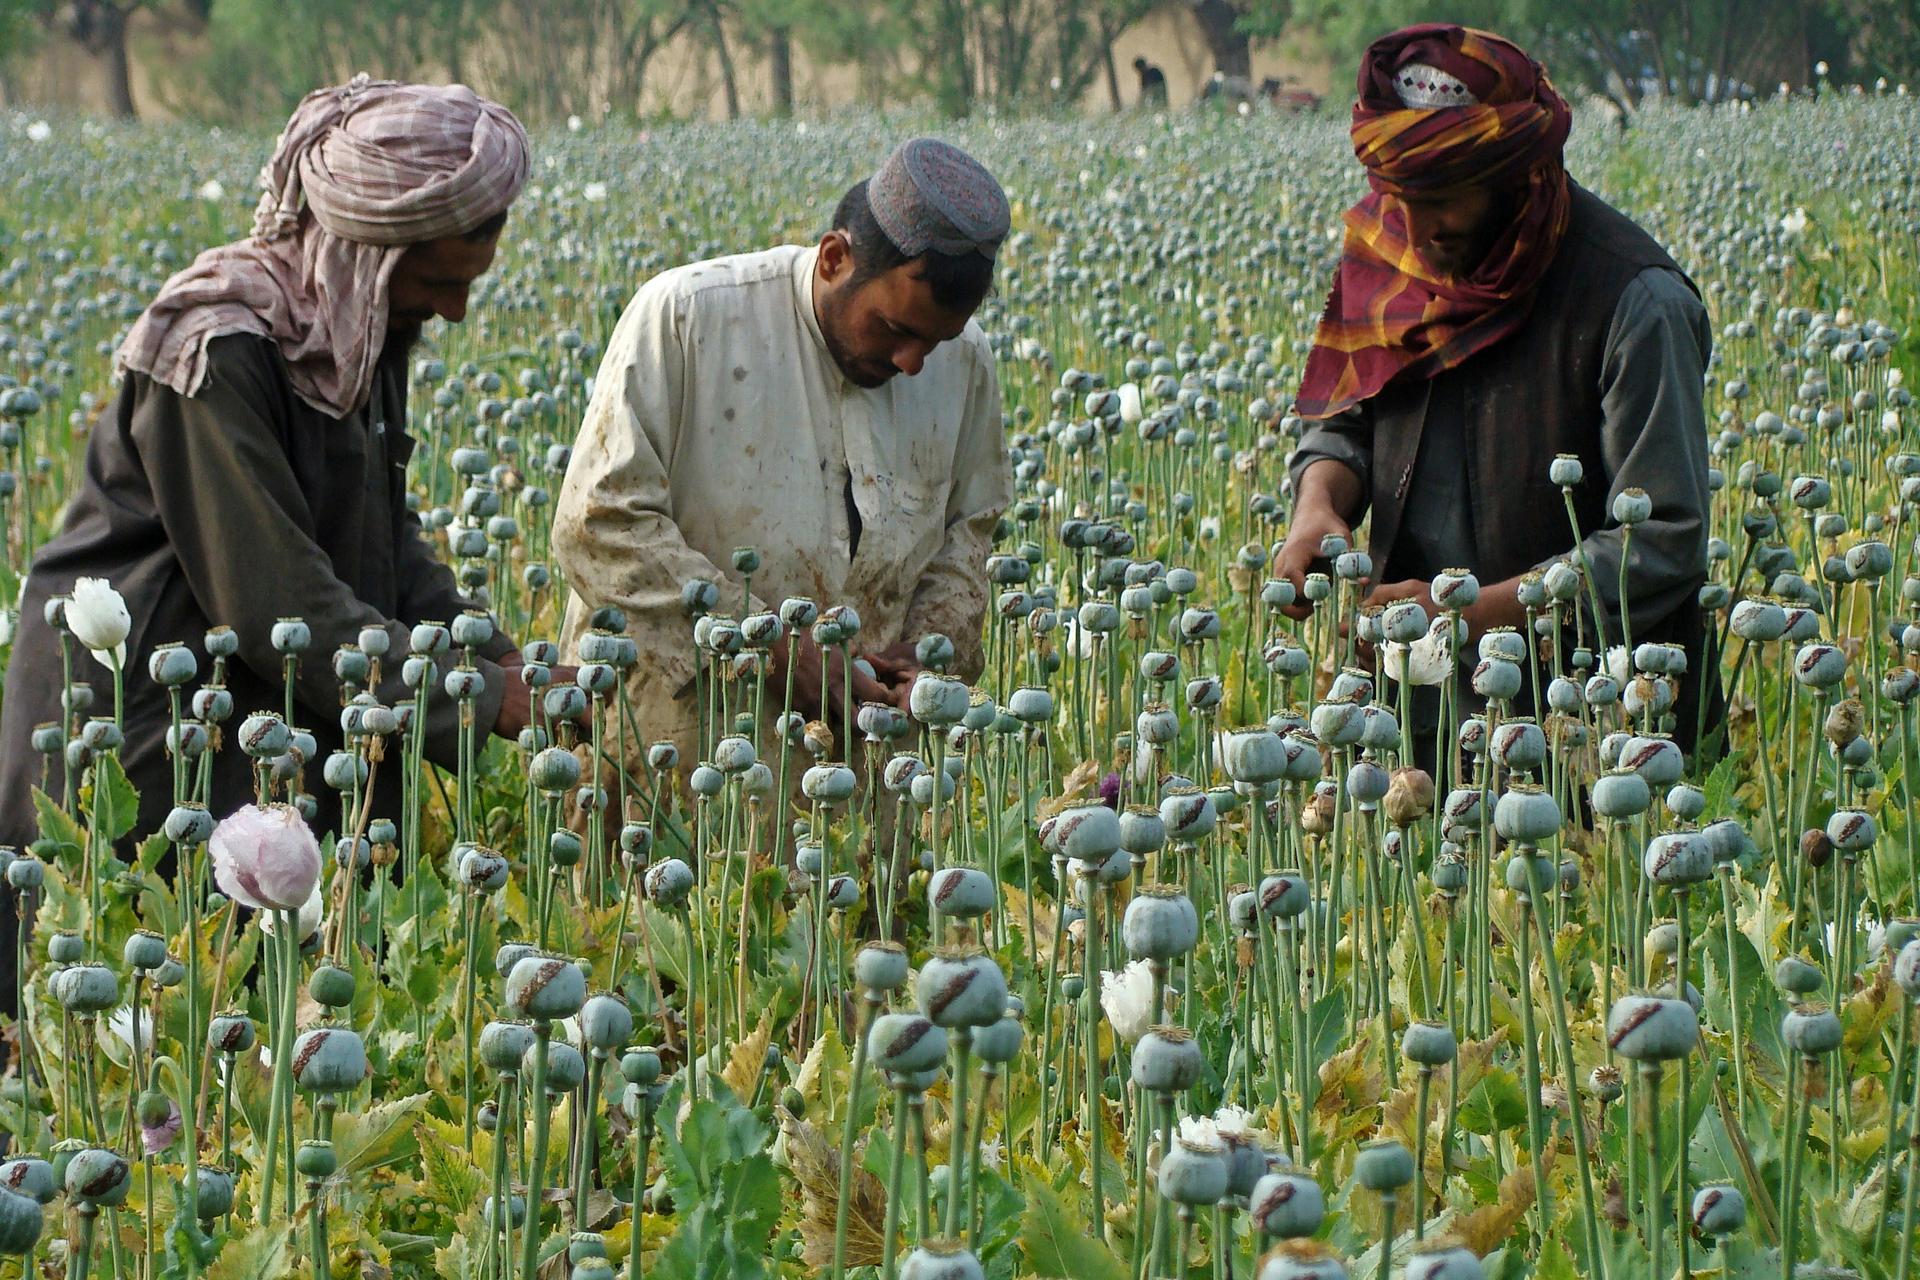 The Taliban have made a significant share of their revenue in the past from the drug trade.